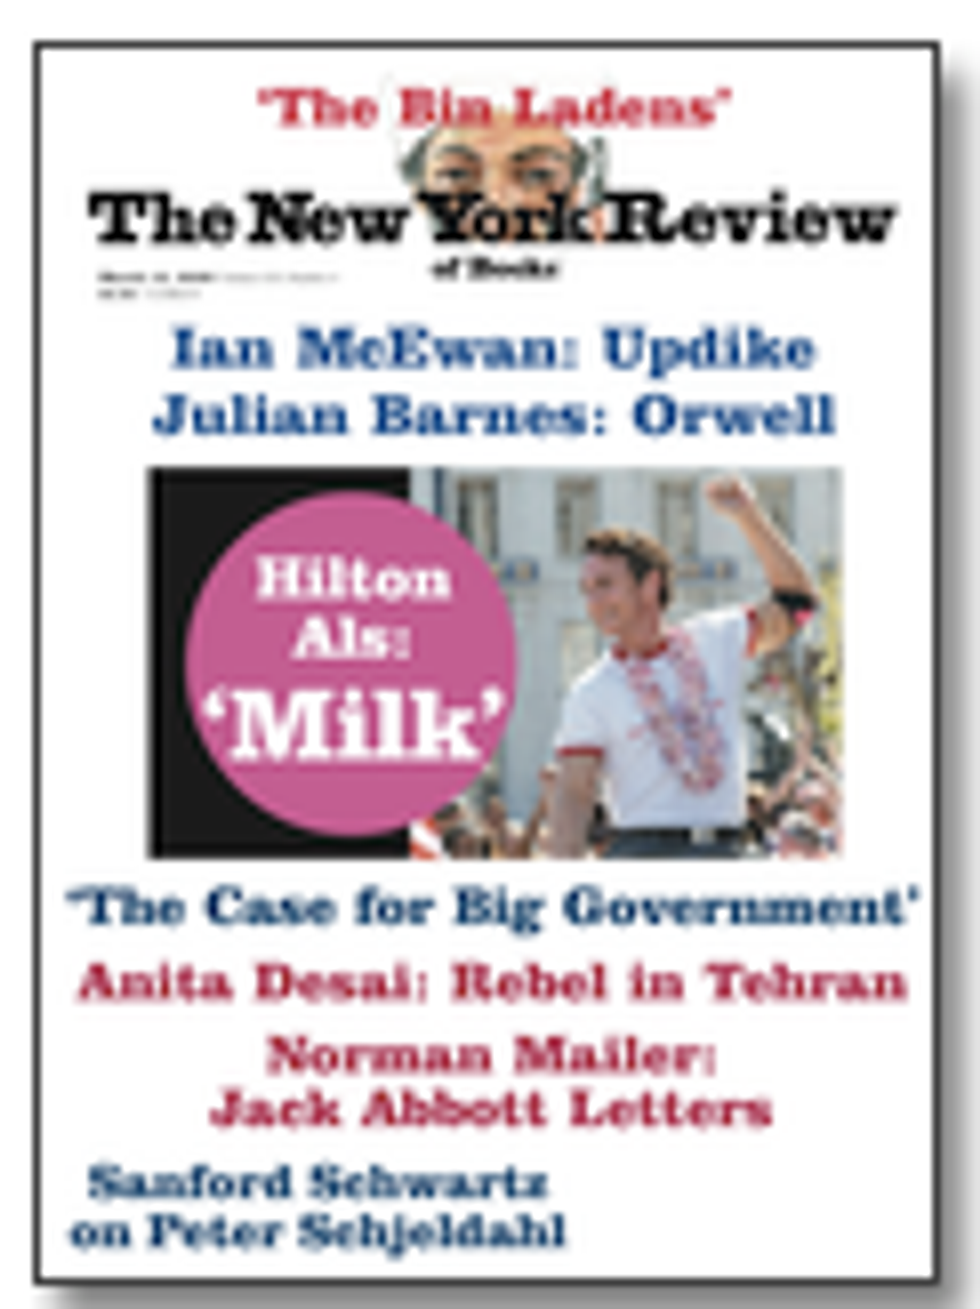 Reviewing The New York Review